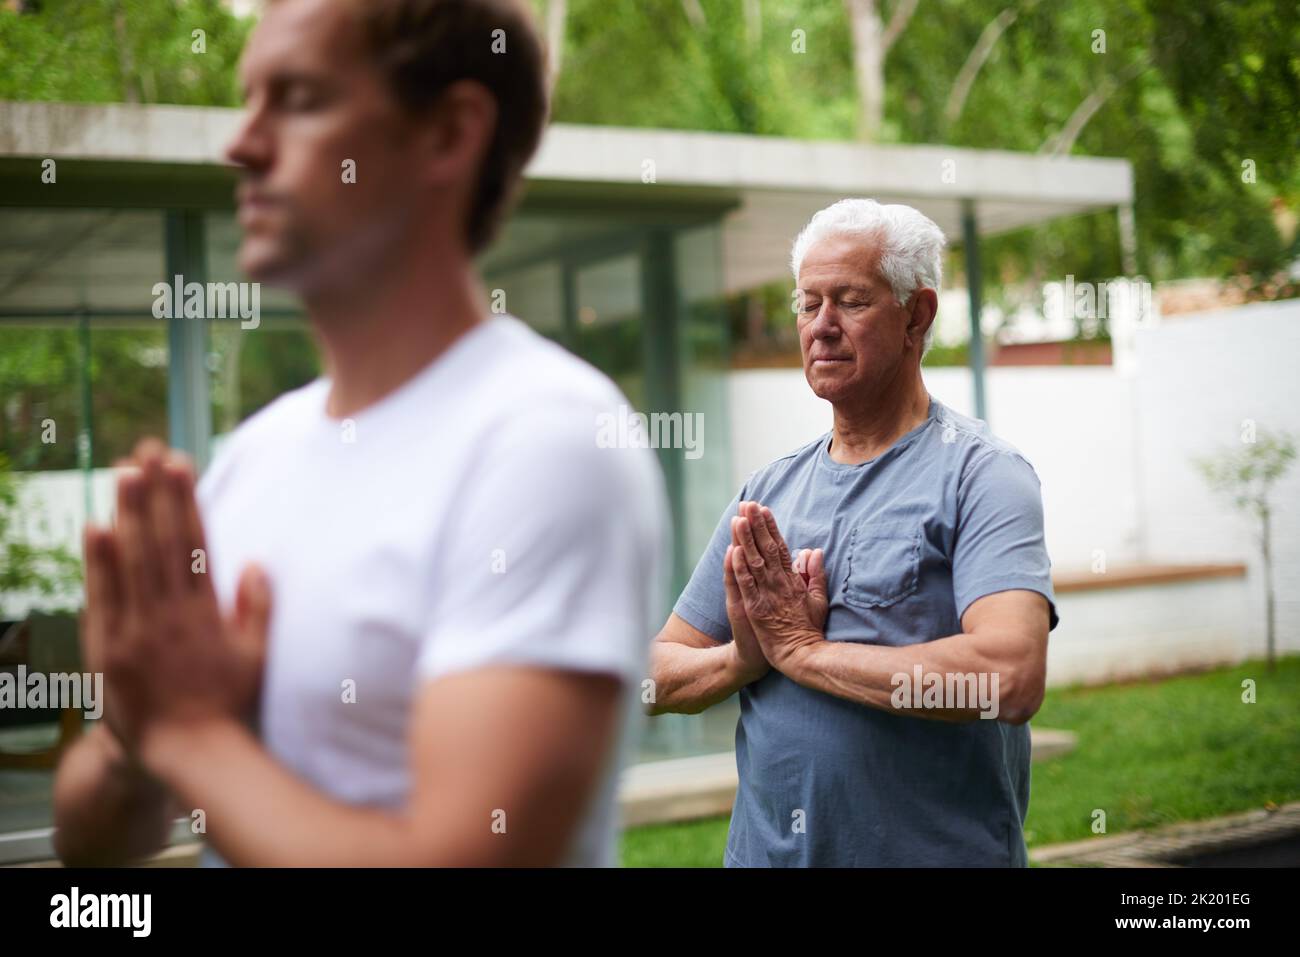 Making some time to clear the mind. a senior man meditating in an outdoor yoga class. Stock Photo